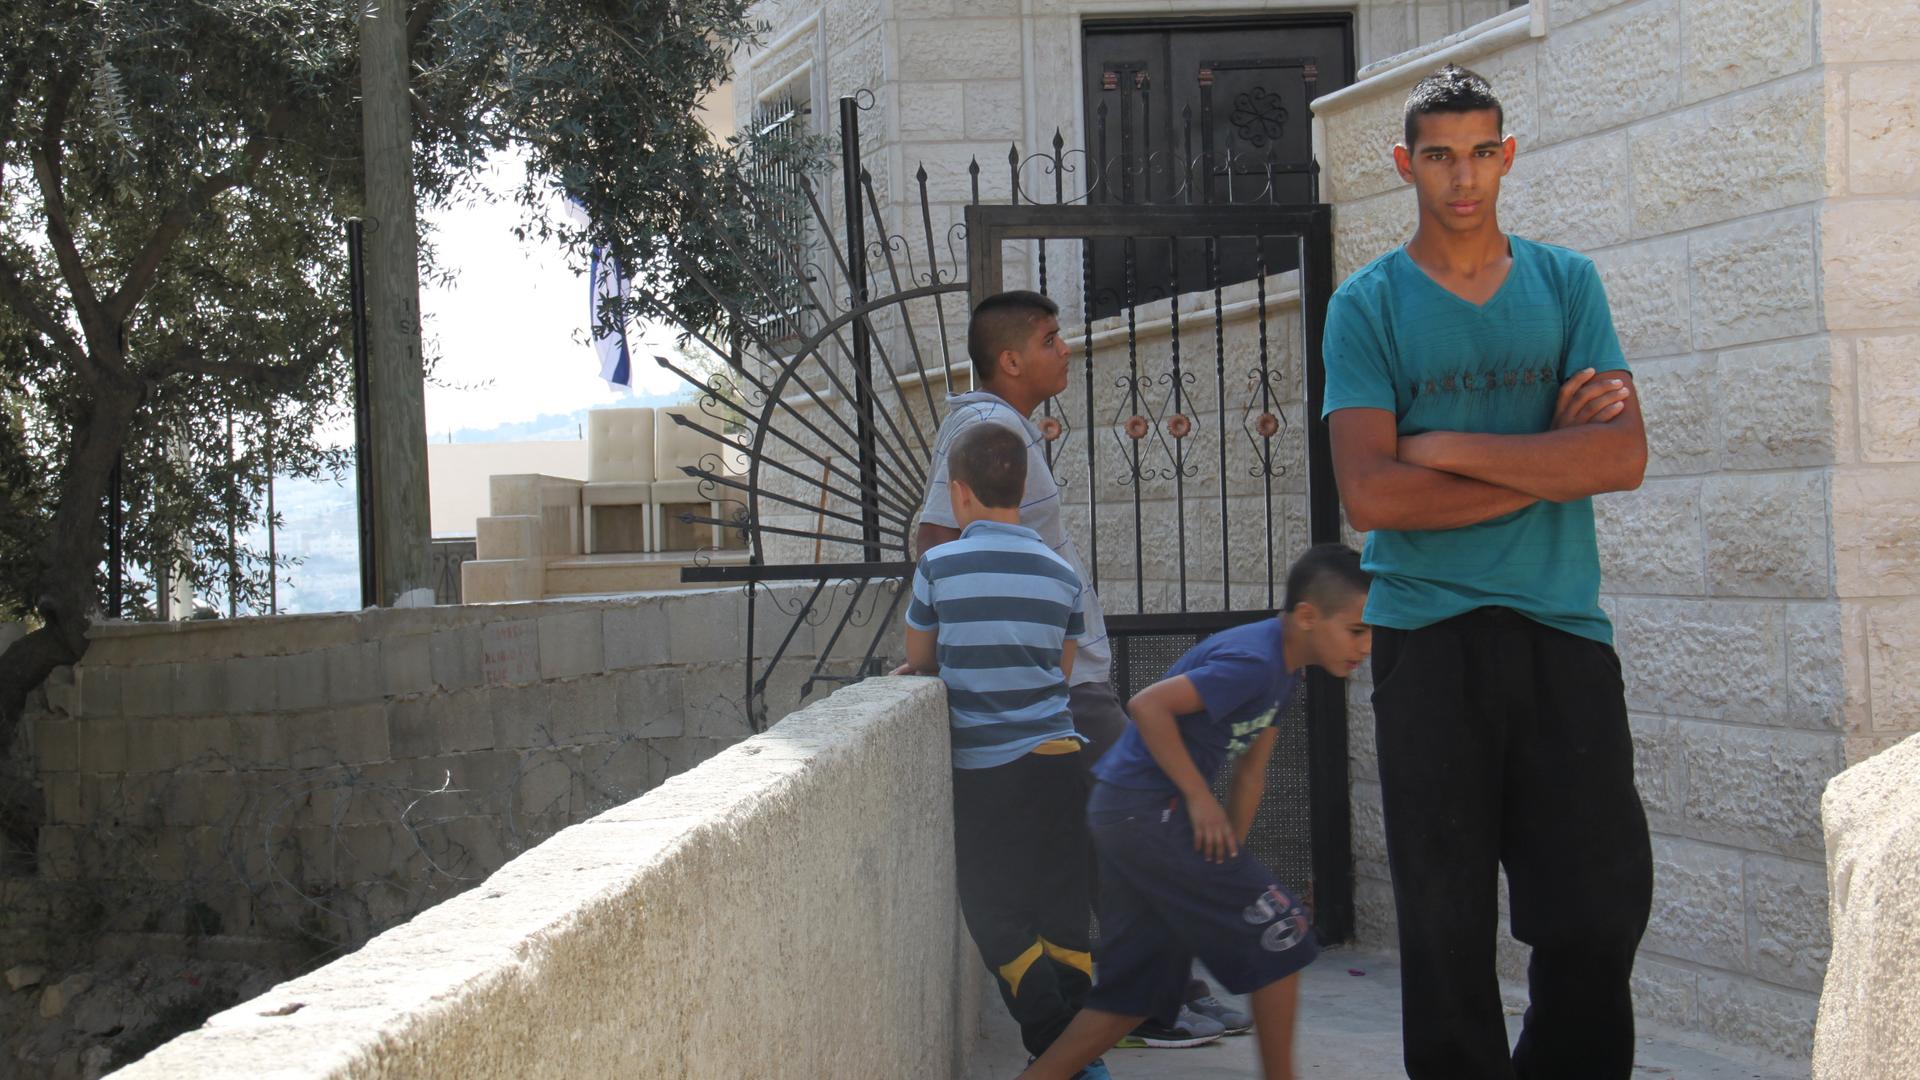 Palestinian residents in front of the Baydoun home recently occupied by Israelis.